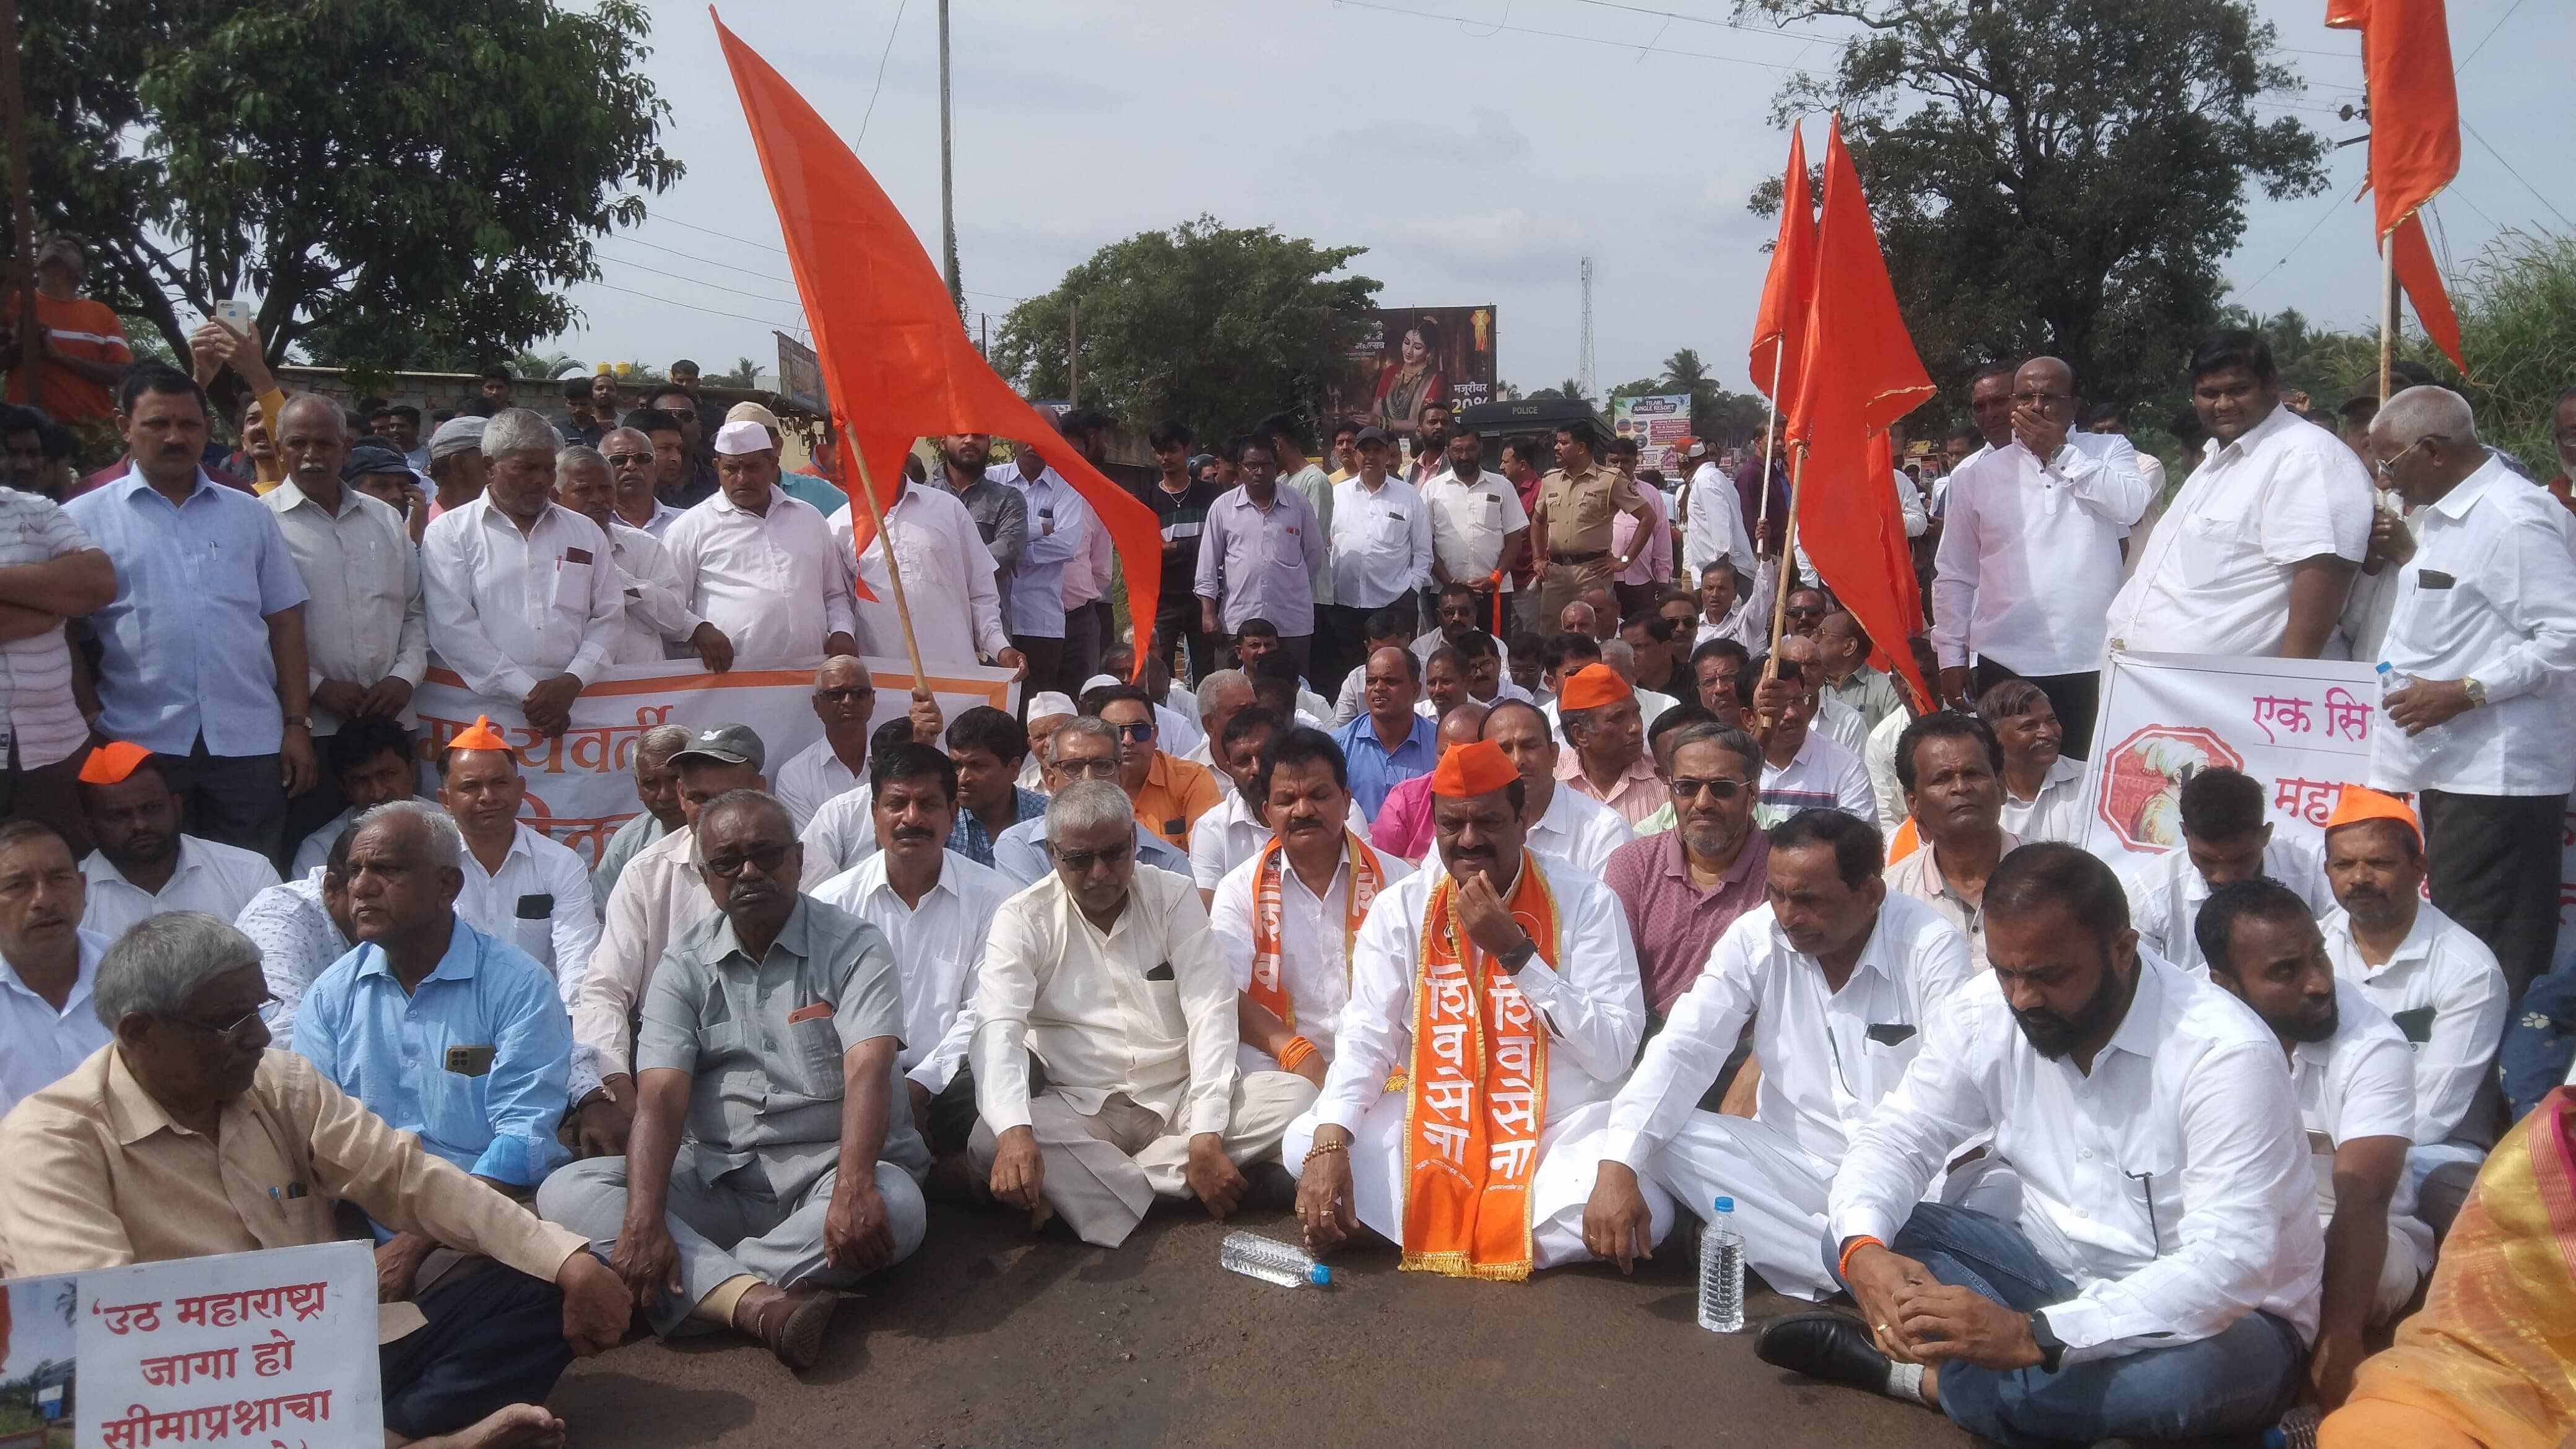 <div class="paragraphs"><p>MES leaders staging rasta roko protest in lieu of ‘maha melava’ (mega convention) at Shinoli village in Chandgad taluk in Kolhapur district of Maharashtra on Monday.</p></div>